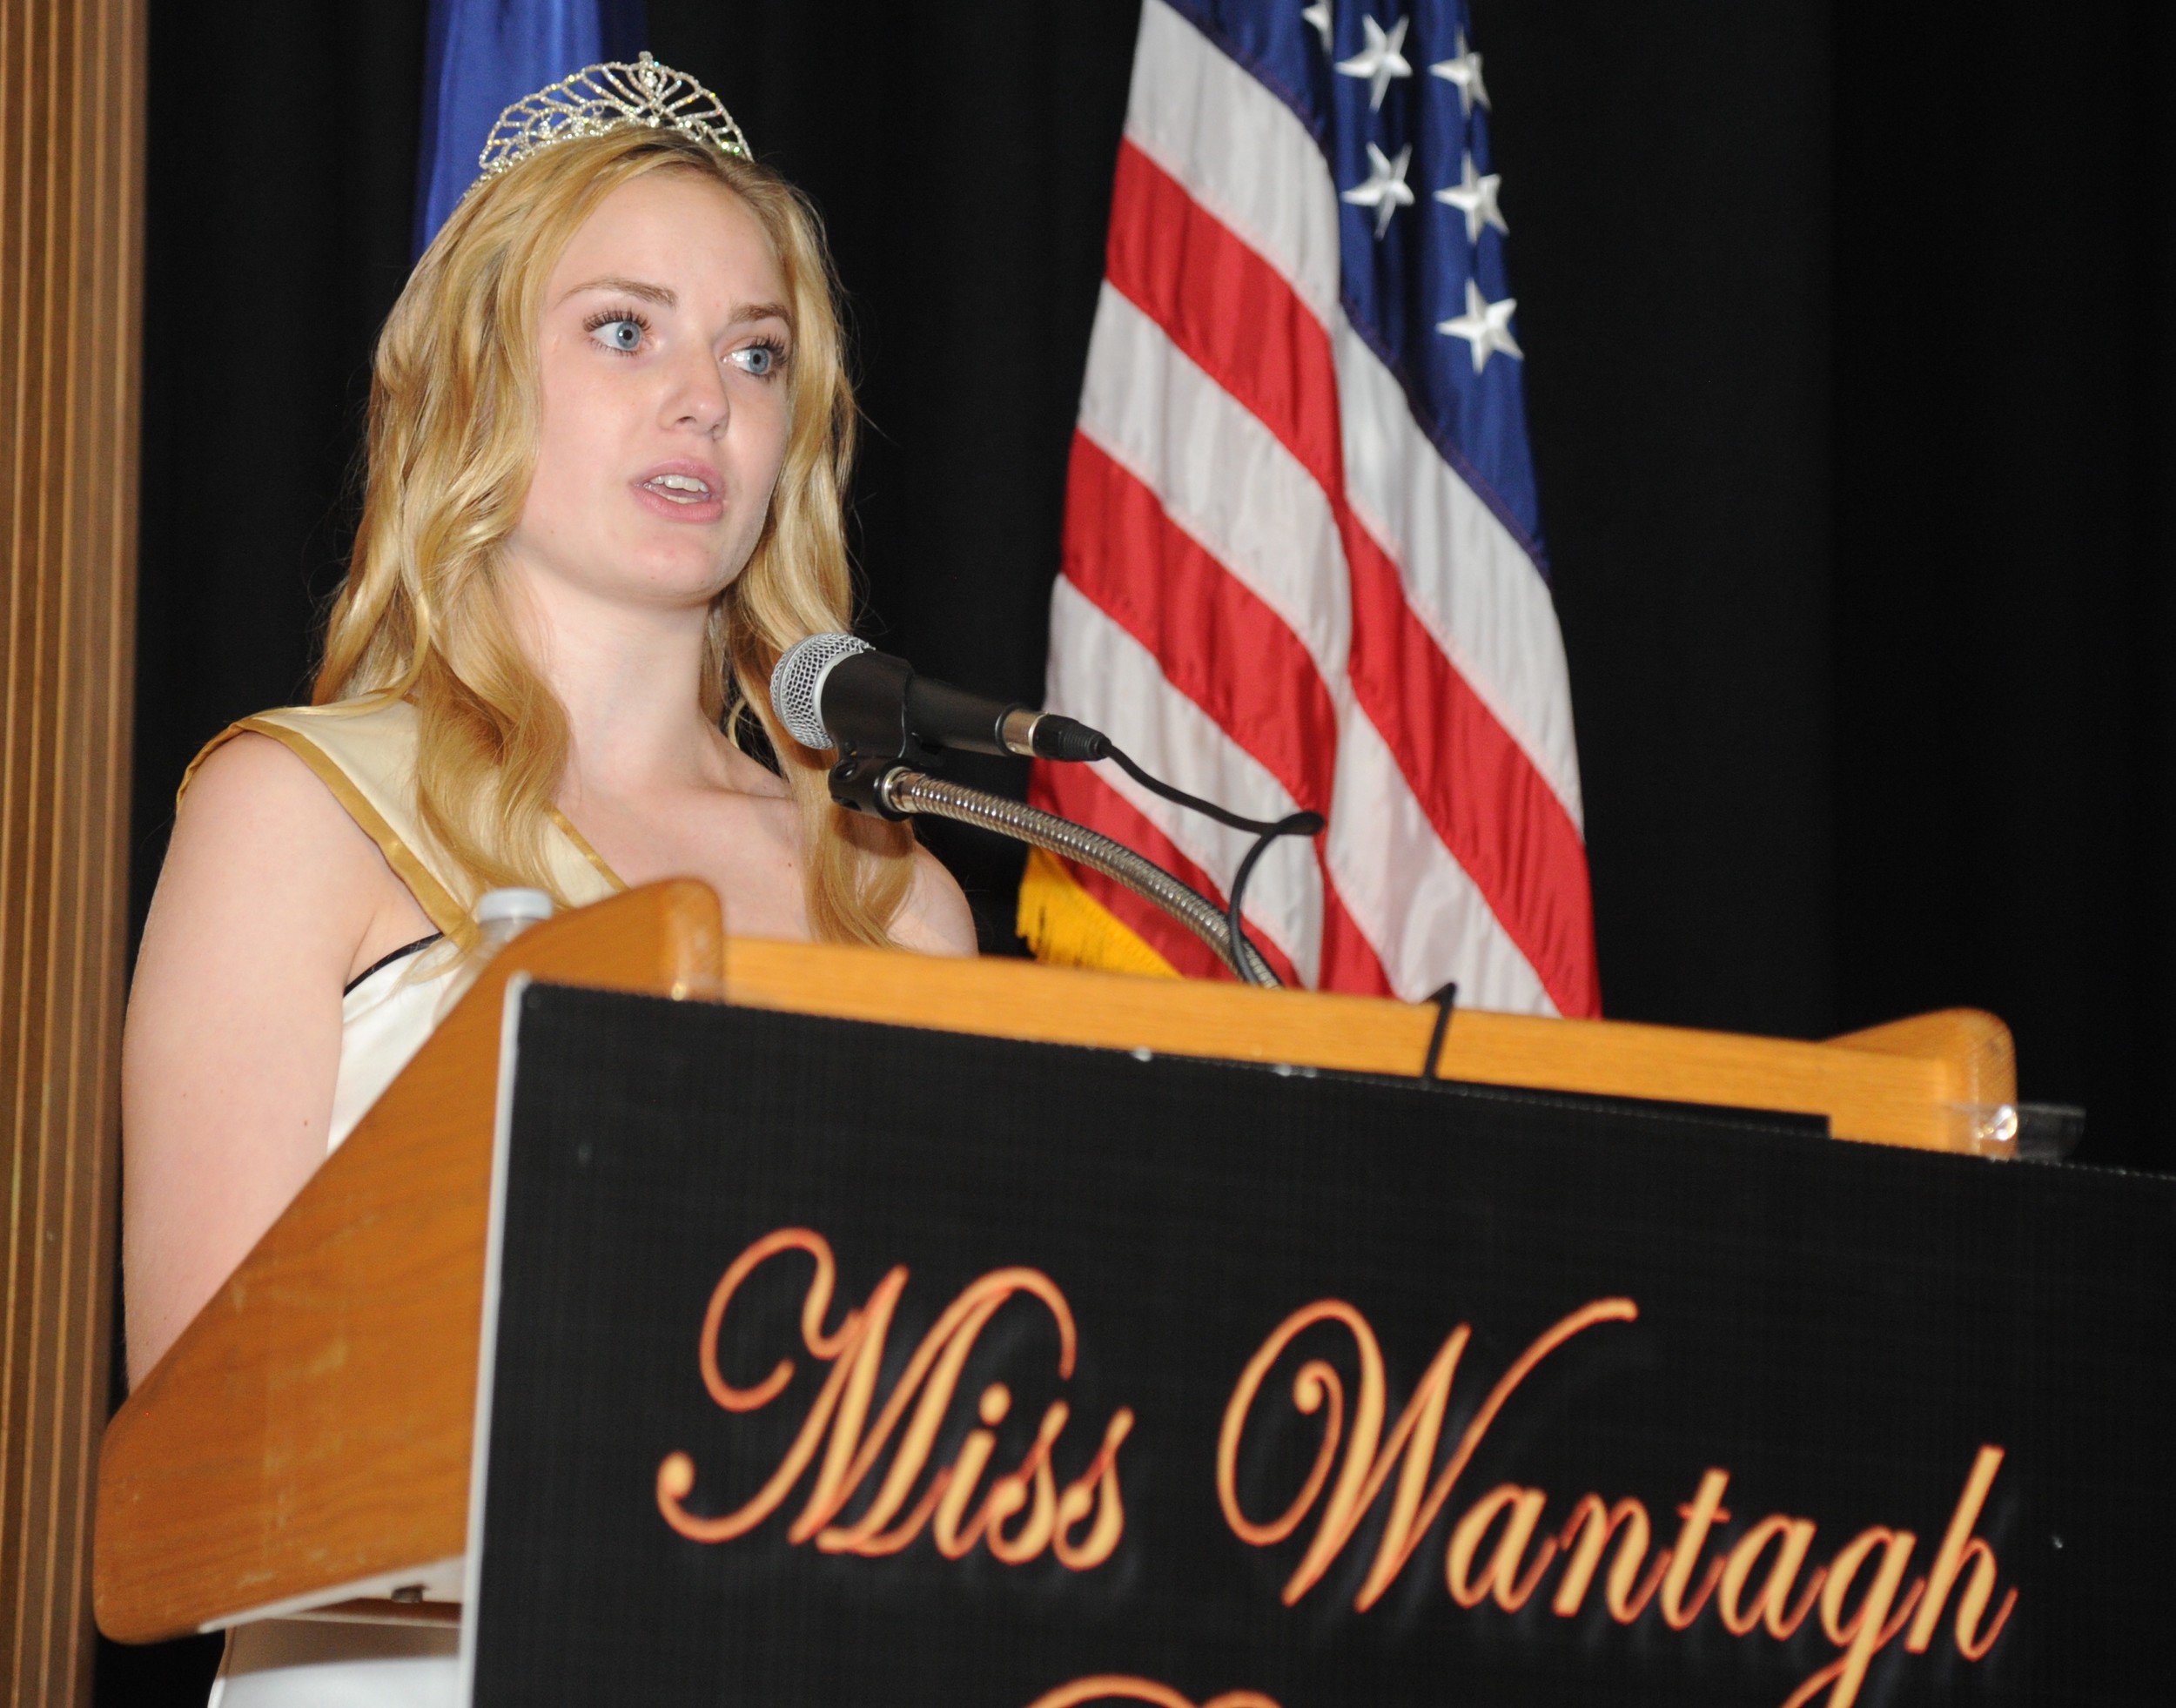 Former Miss Wantagh Keri Balnis gave a speech at the Miss Wantagh Pageant on July 1 at Wantagh High School.